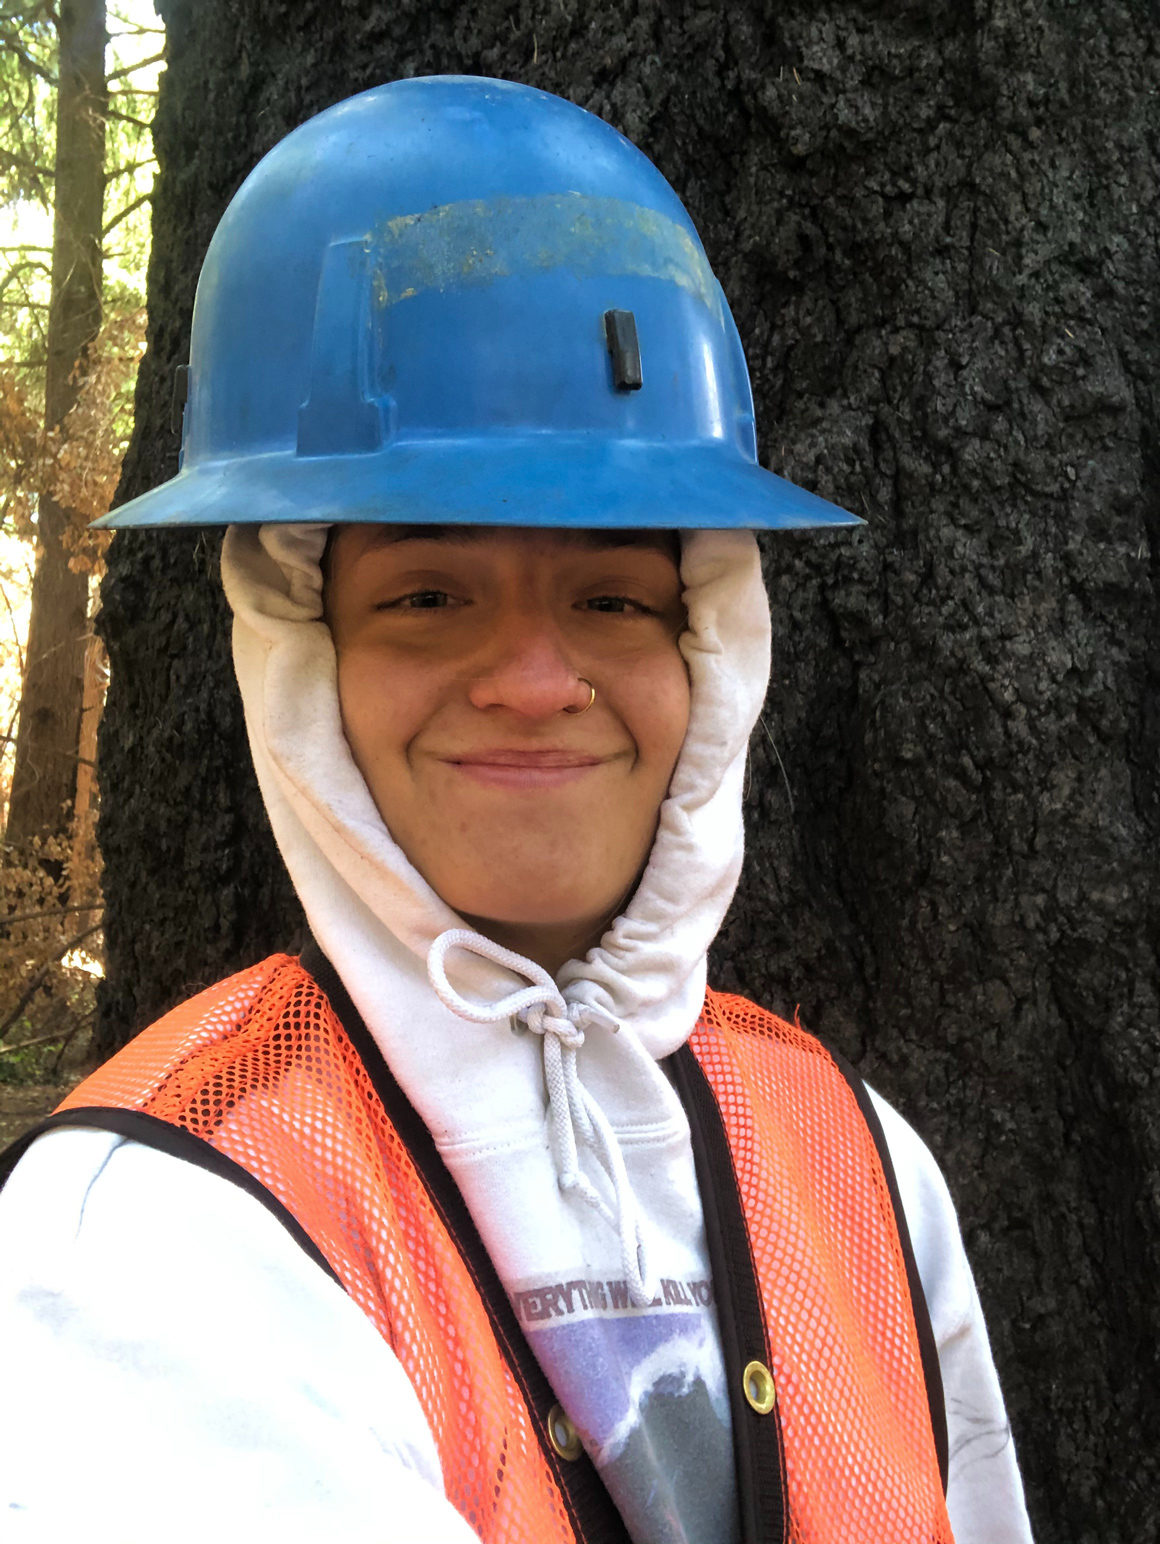 Hope Gale-Hendry wearing a blue hard hat and safety vest in front of a large tree.